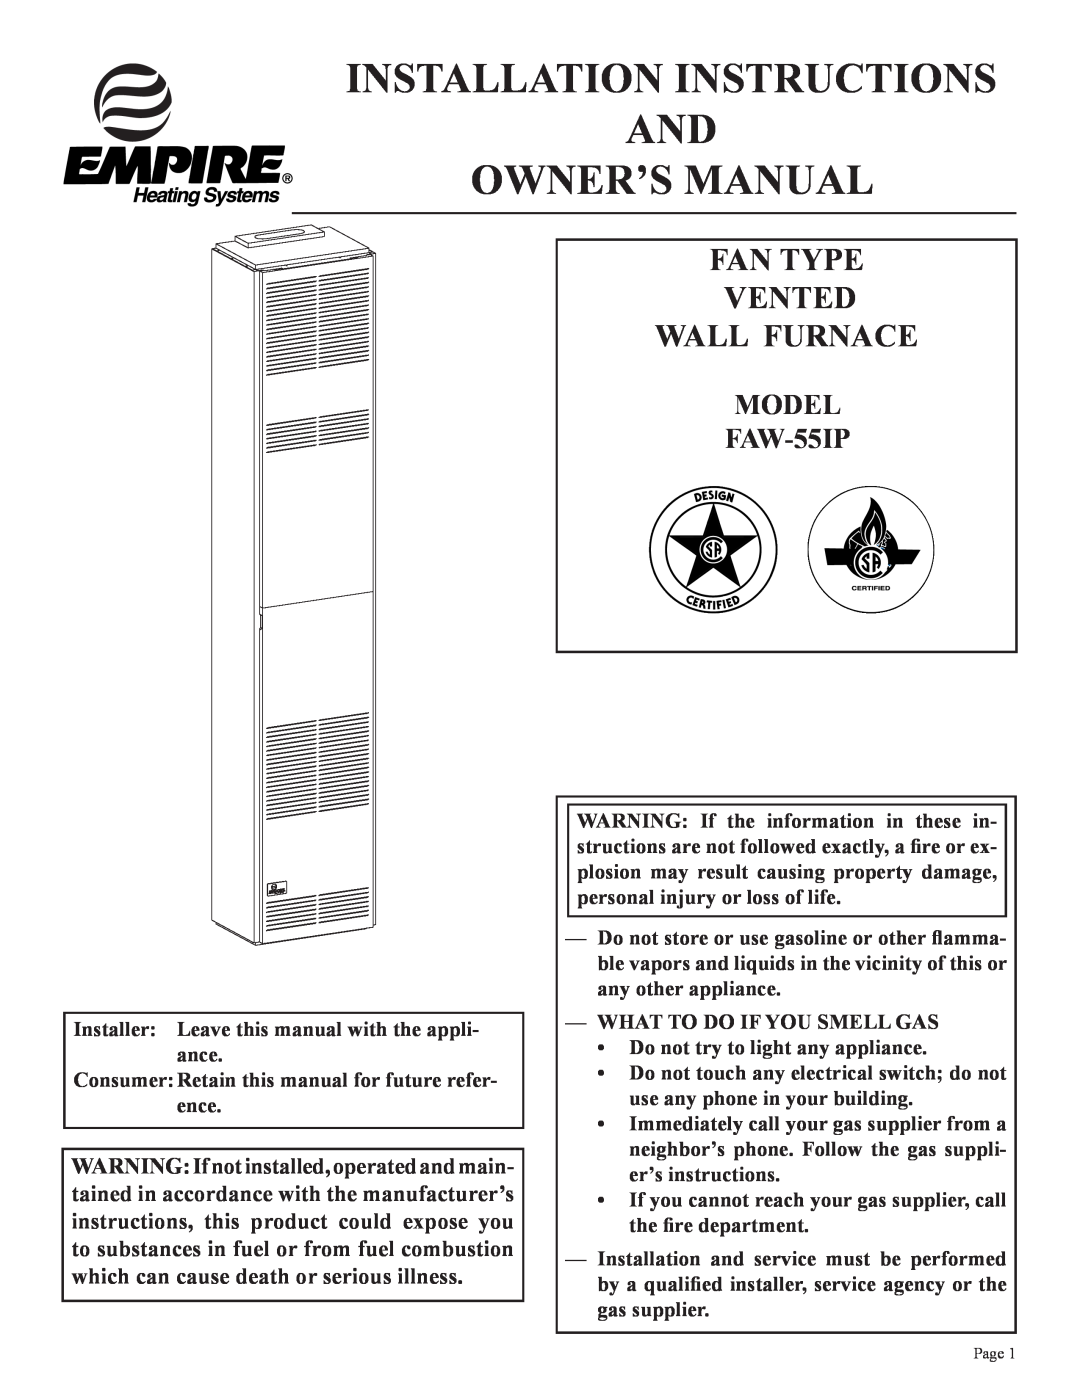 Empire Products installation instructions Fan Type Vented Wall Furnace, MODEL FAW-55IP 